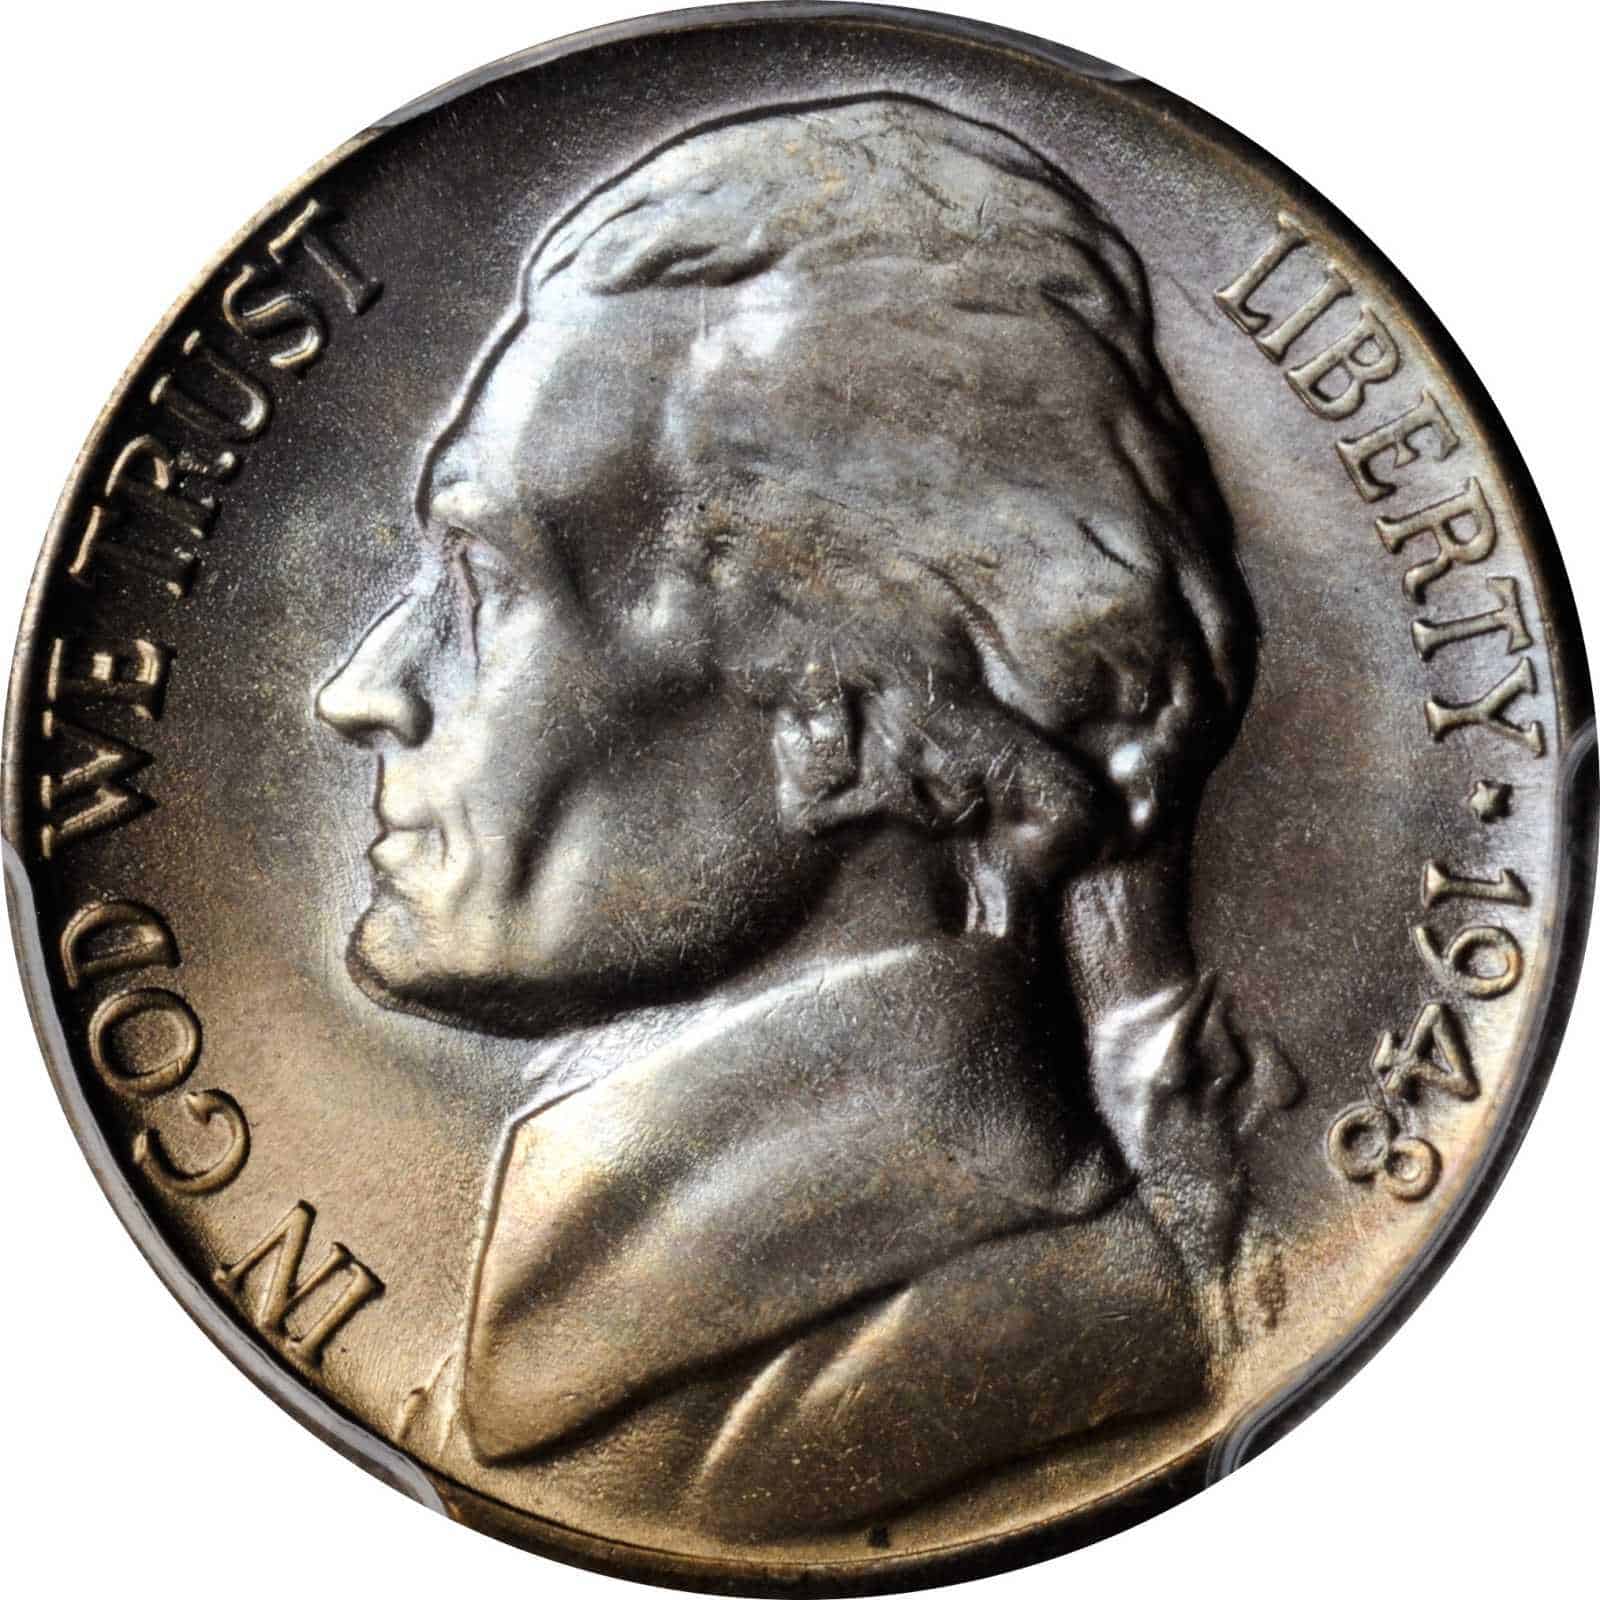 The Obverse of The 1948 Nickel